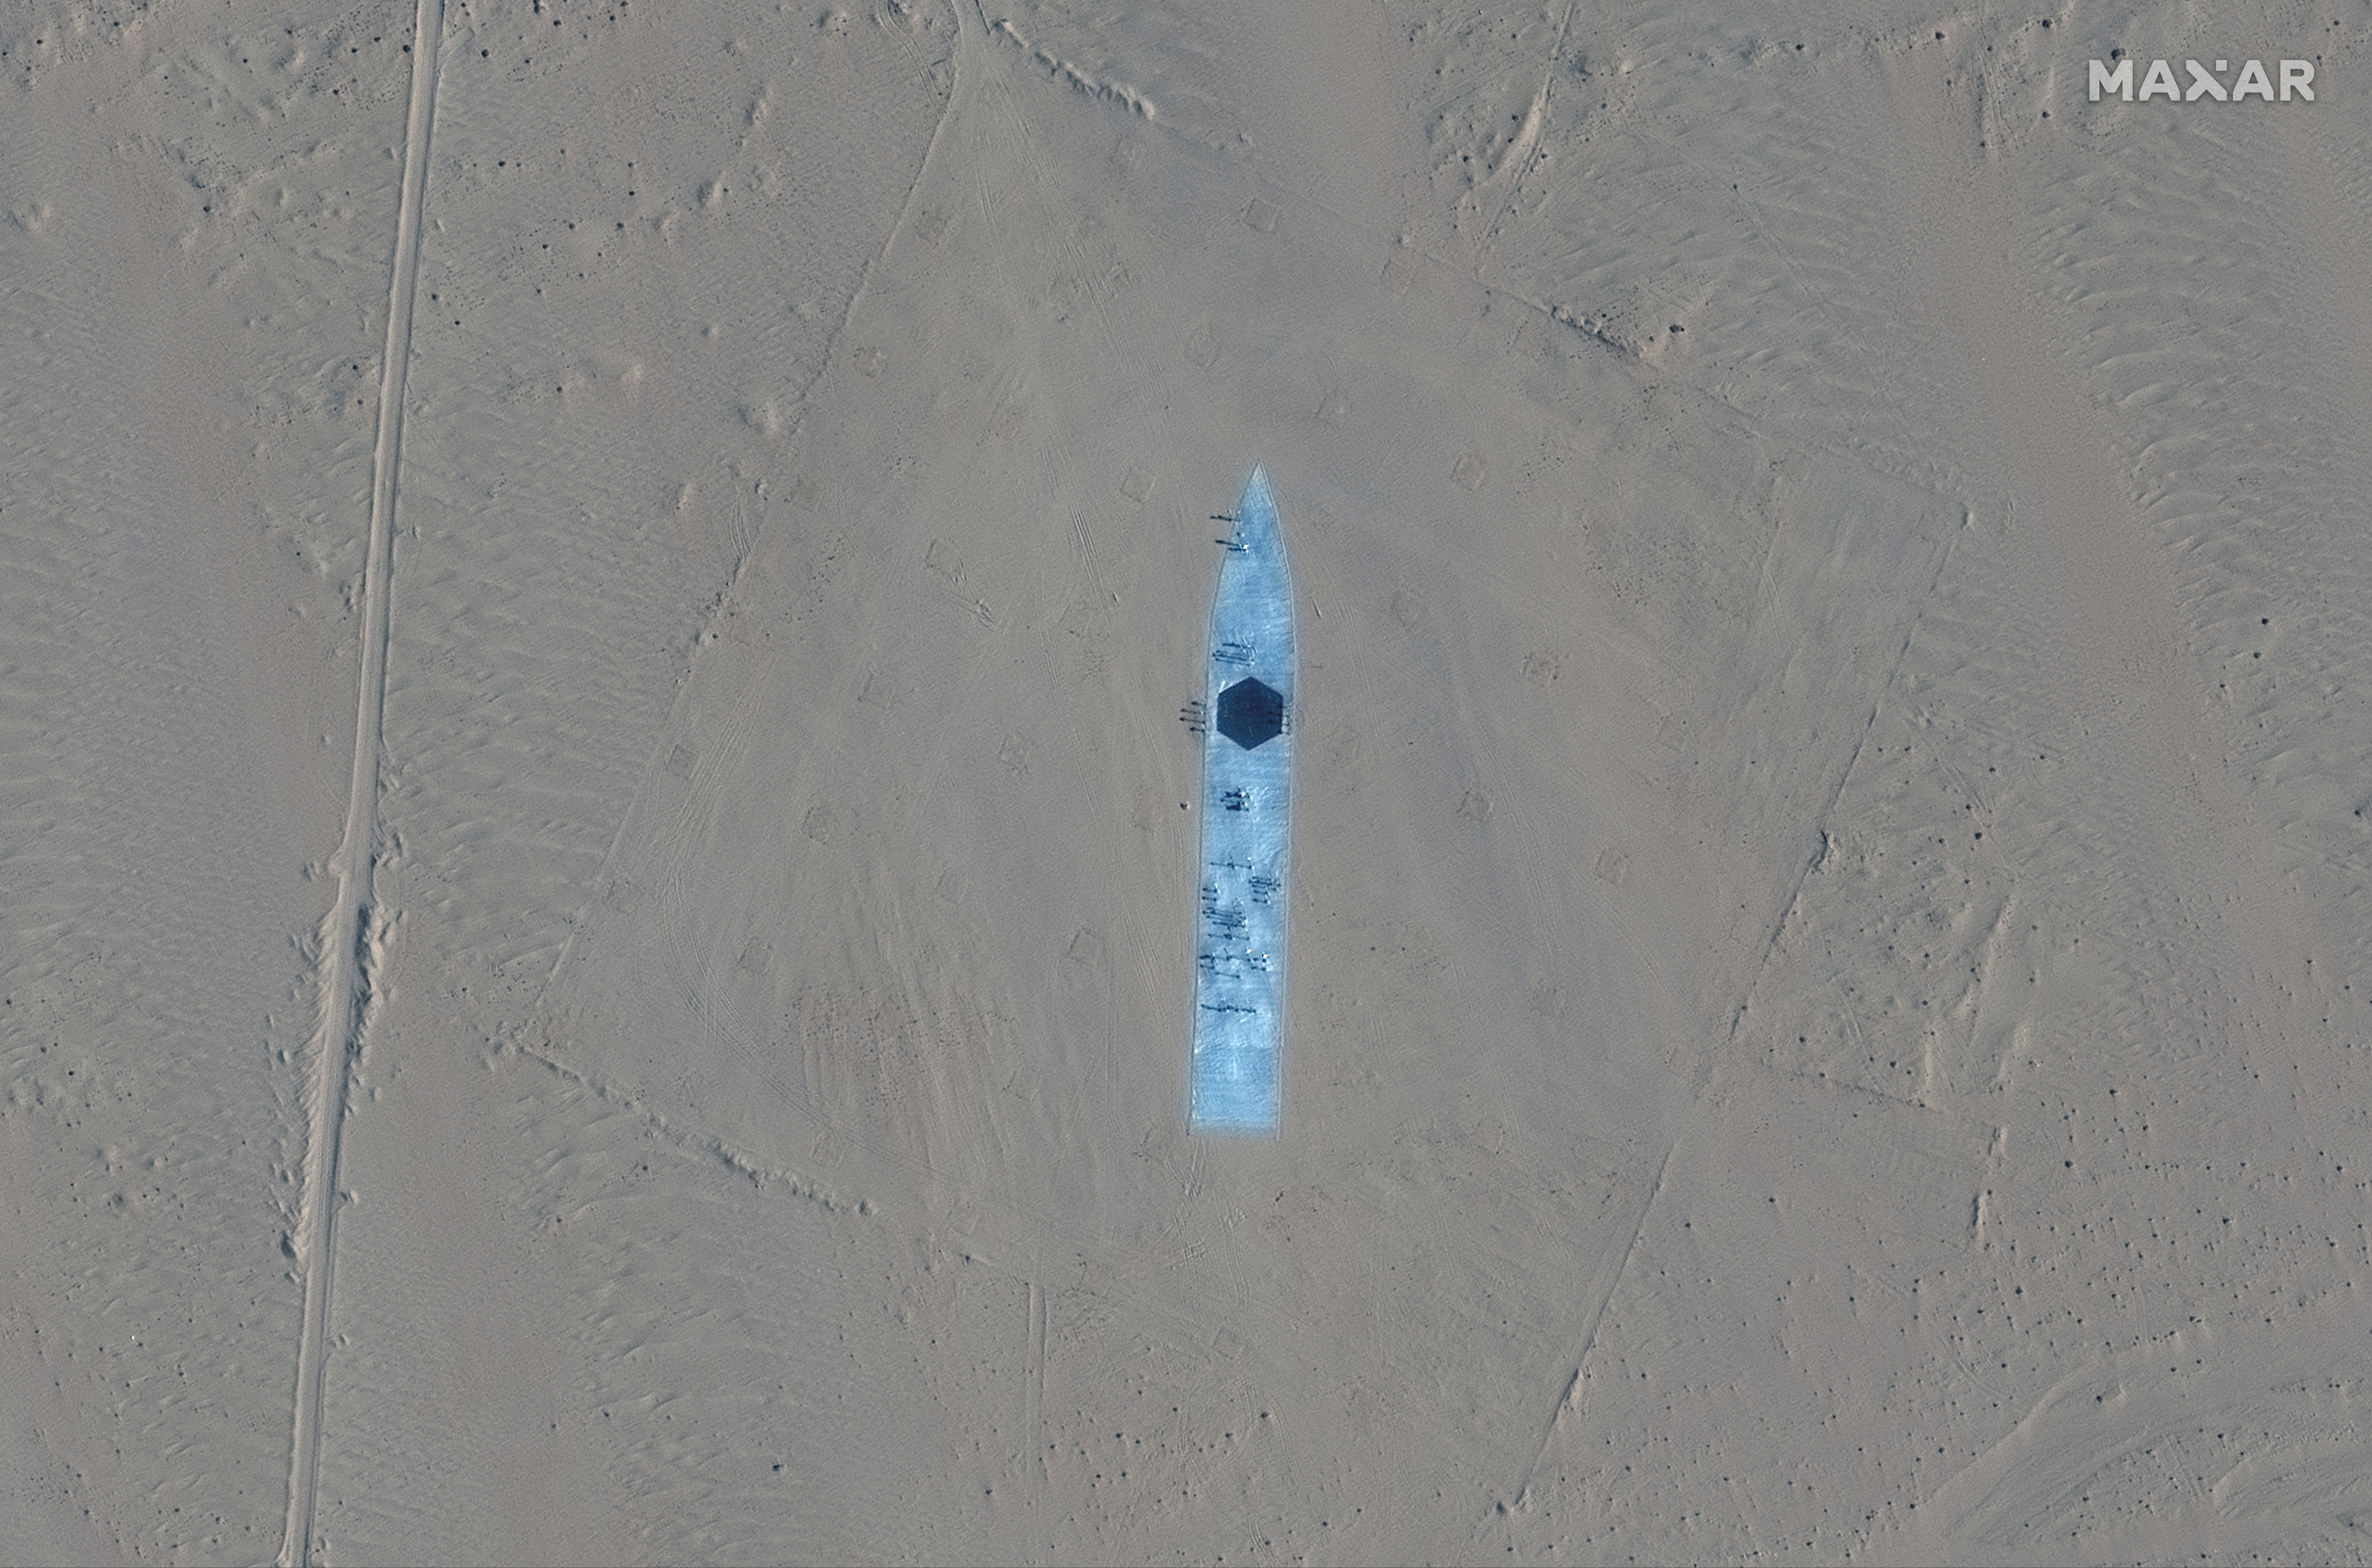 Maxar satellite image shows a destroyer target in Ruoqiang, Xinjiang, China